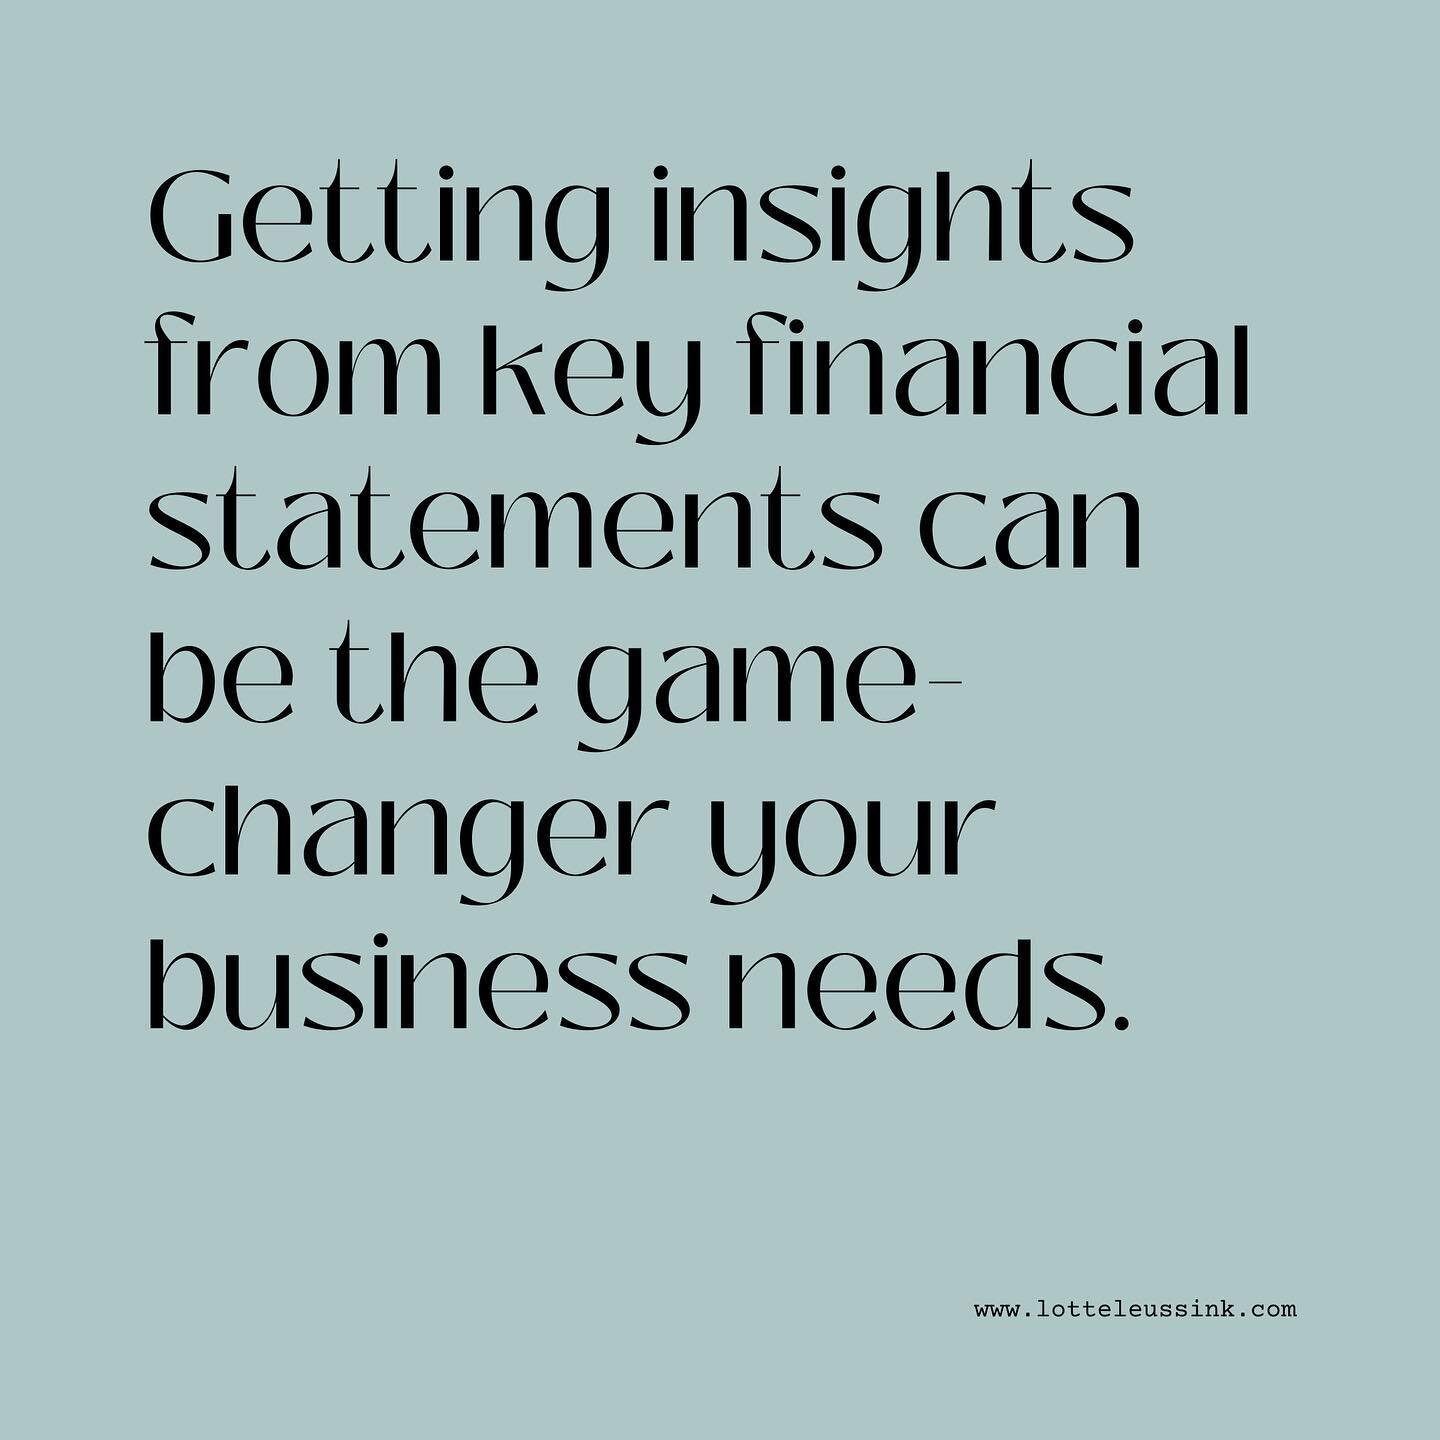 Why? How?

These key financial statements can provide a clear picture of your businesses finances and give you greater insights into profitability of projects, services, products and more. 

For instance, let&rsquo;s say you hire subcontractors for s